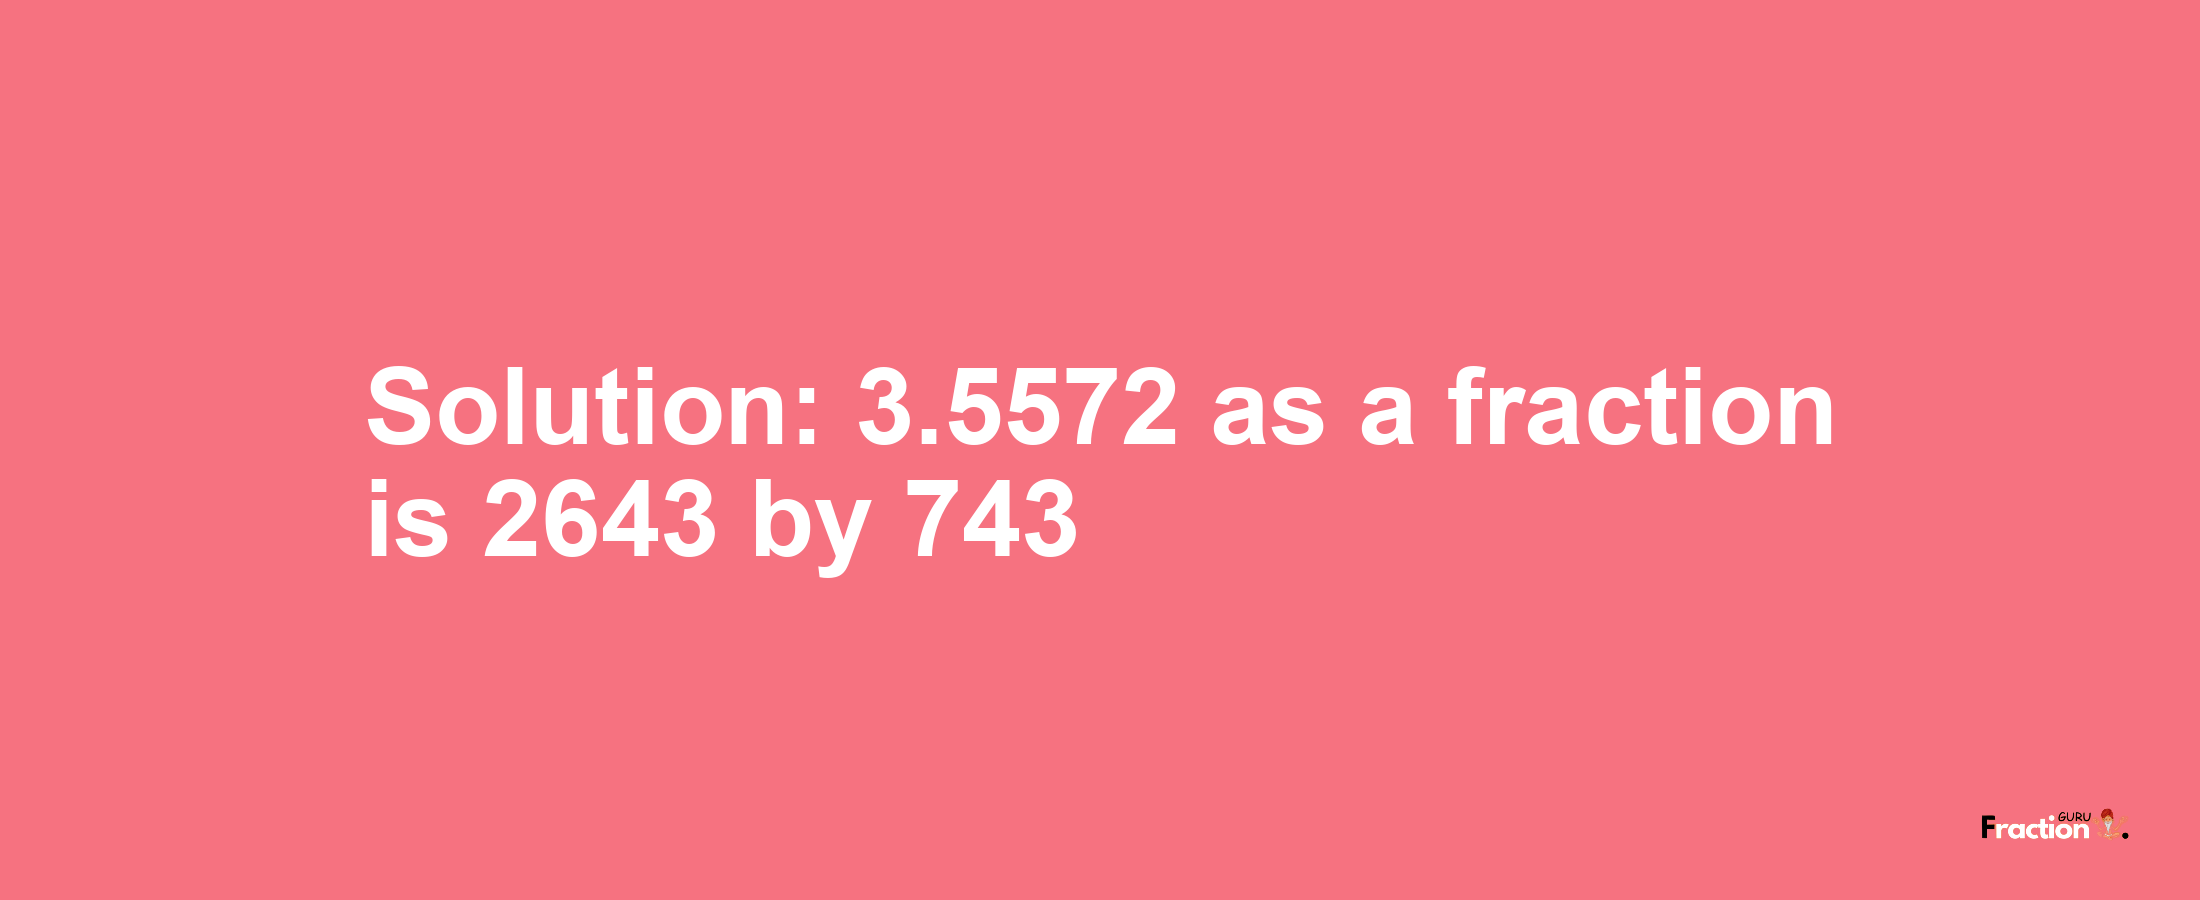 Solution:3.5572 as a fraction is 2643/743